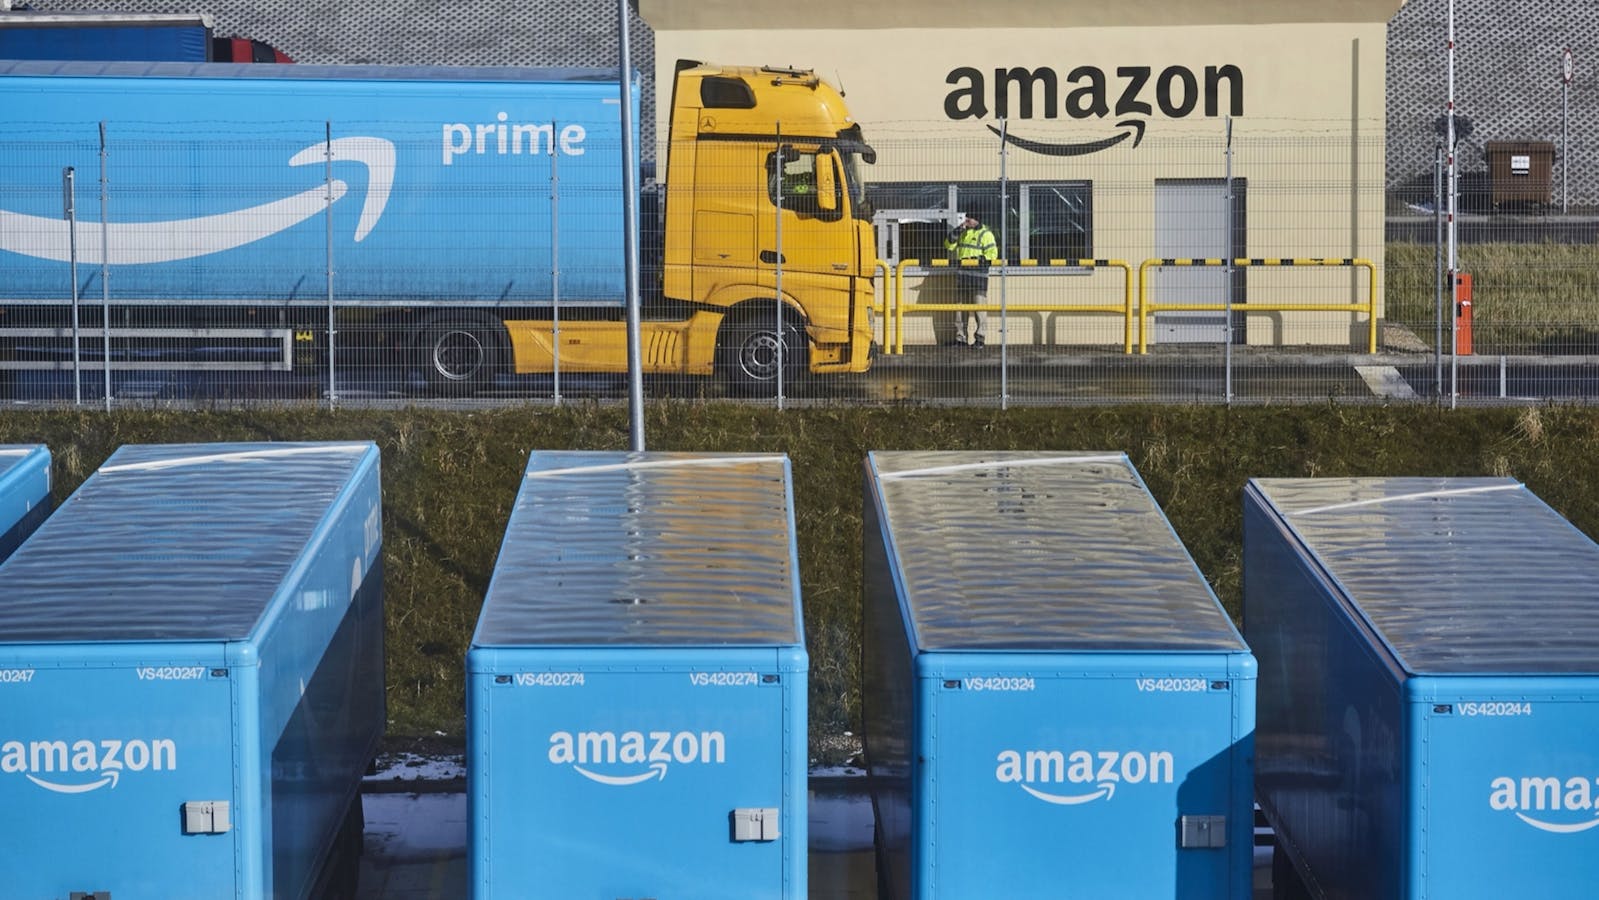 A truck and trailers outside an Amazon fulfillment center in Poland. Photo by Bloomberg